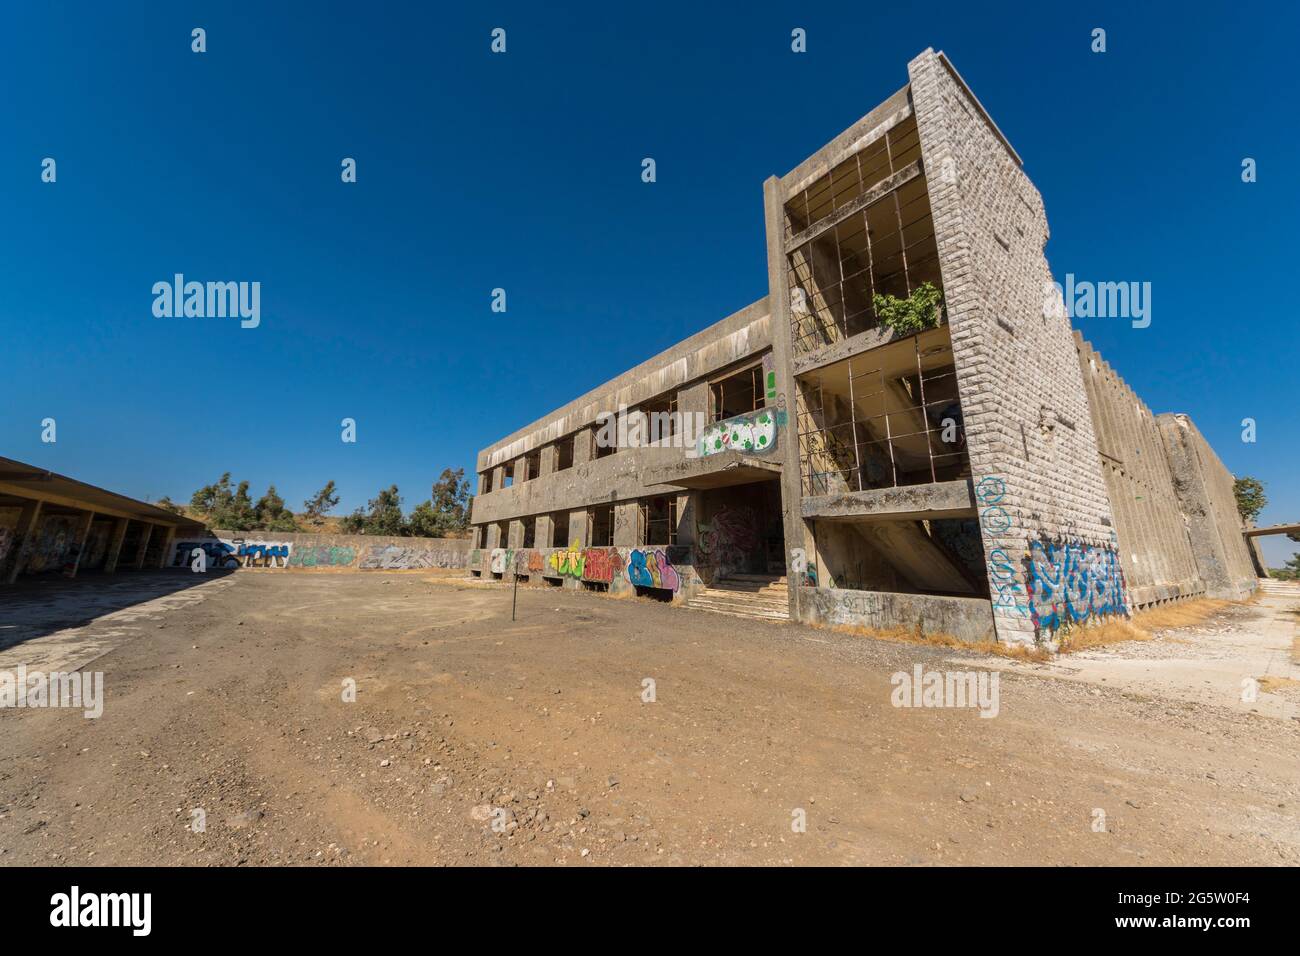 Golan Heights, Israel. The former HQ building of the Syrian intelligence service, now abandoned and graffitti-covered. Stock Photo